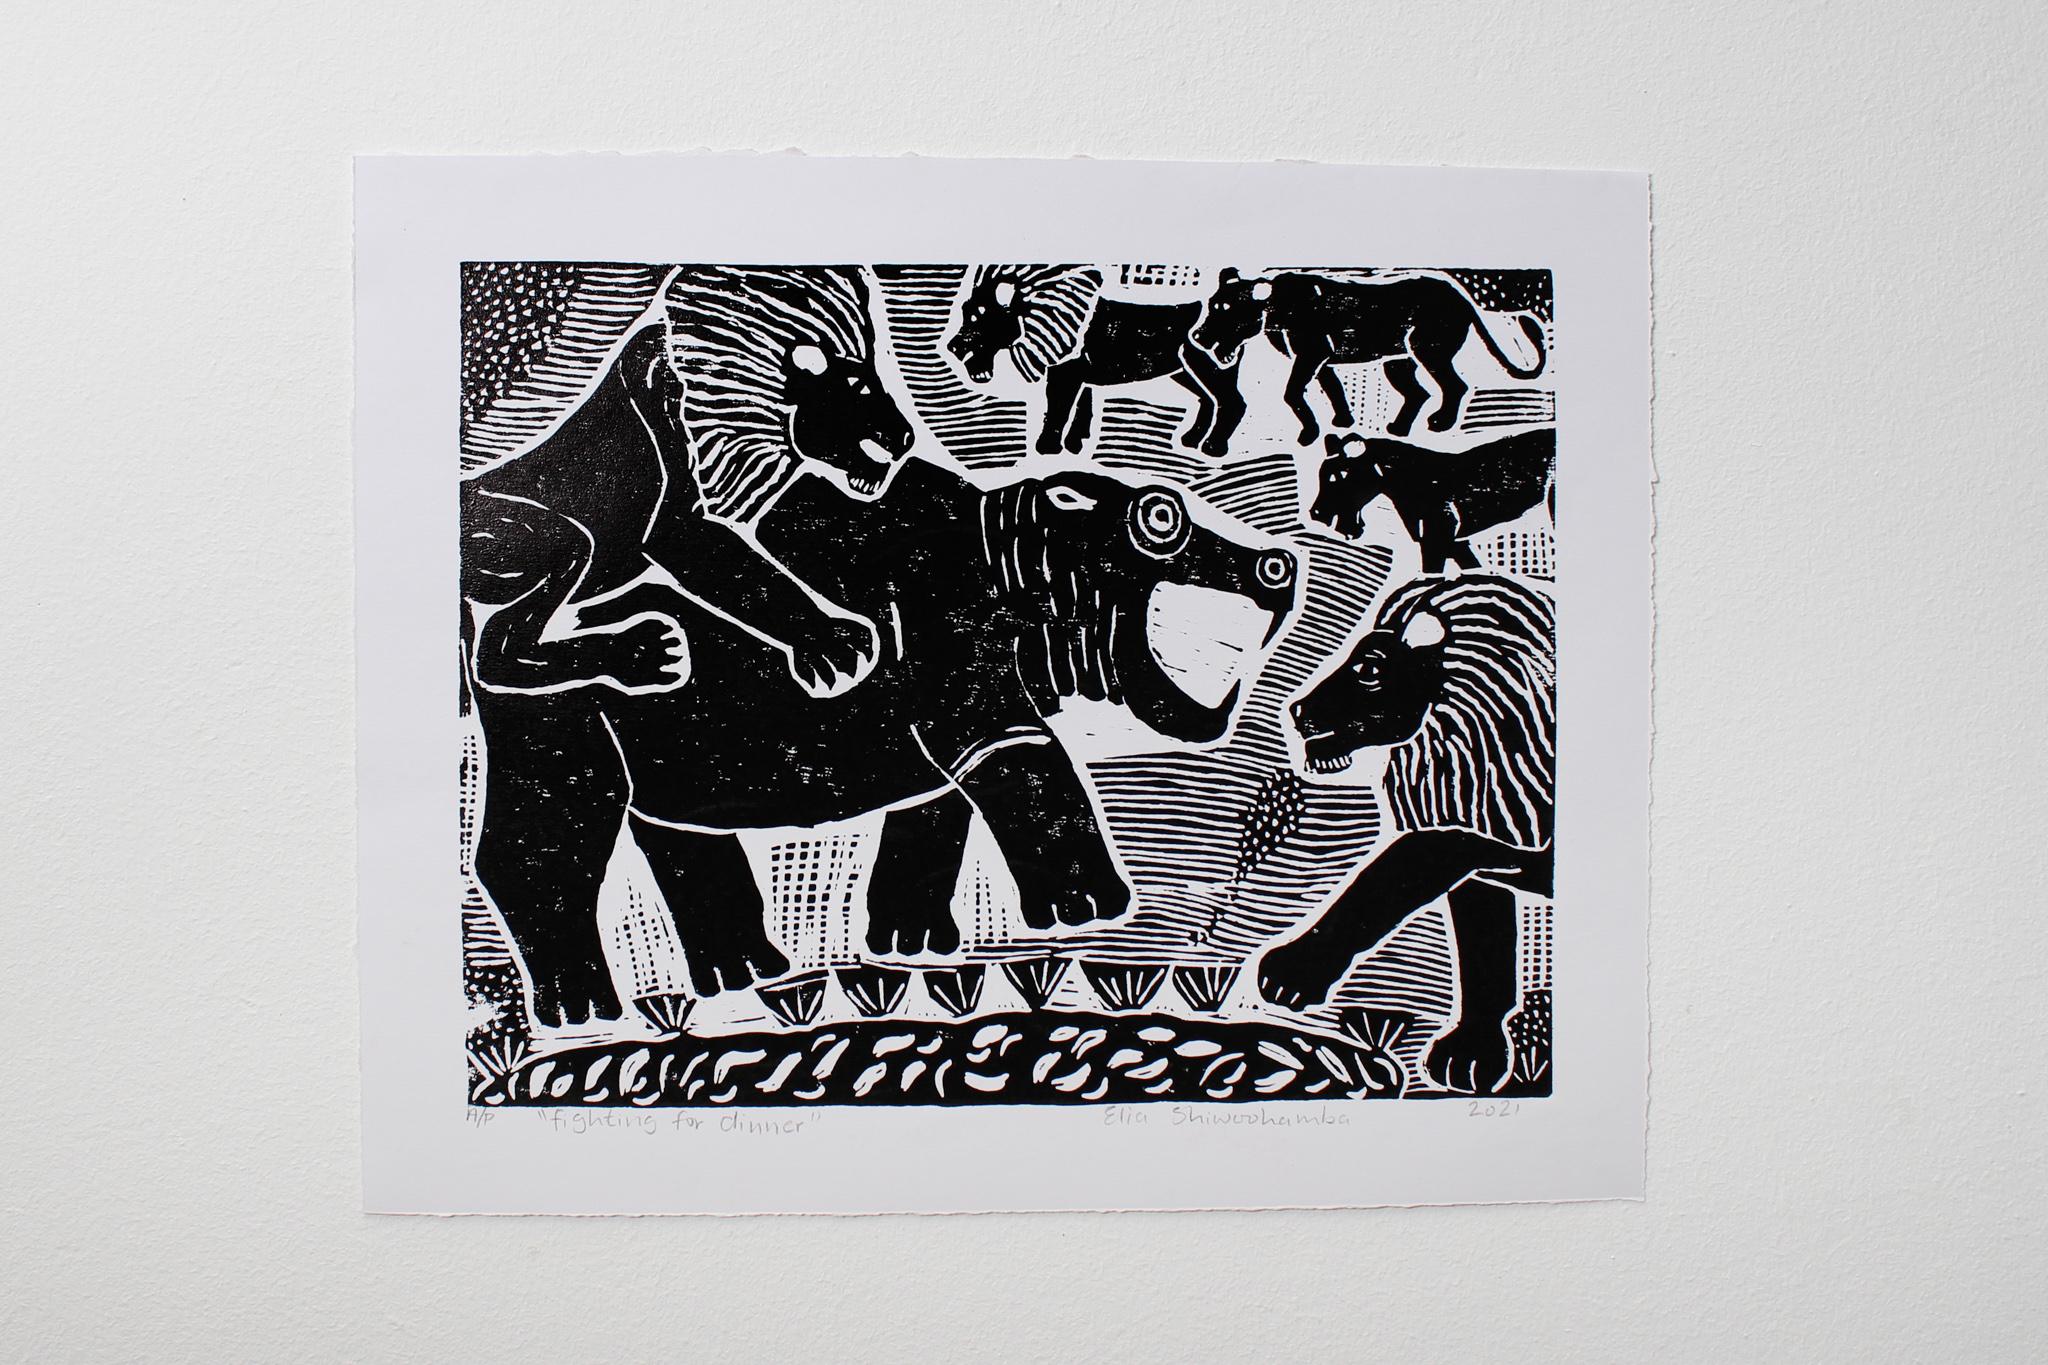 Fighting for dinner, 2021. Linoleum block print on paper. Unlimited Edition.

Elia Shiwoohamba was born in 1981 in Windhoek, Namibia. He graduated from the John Muafangejo Art Centre in Windhoek in 2006. Specialising in printmaking and sculpture,